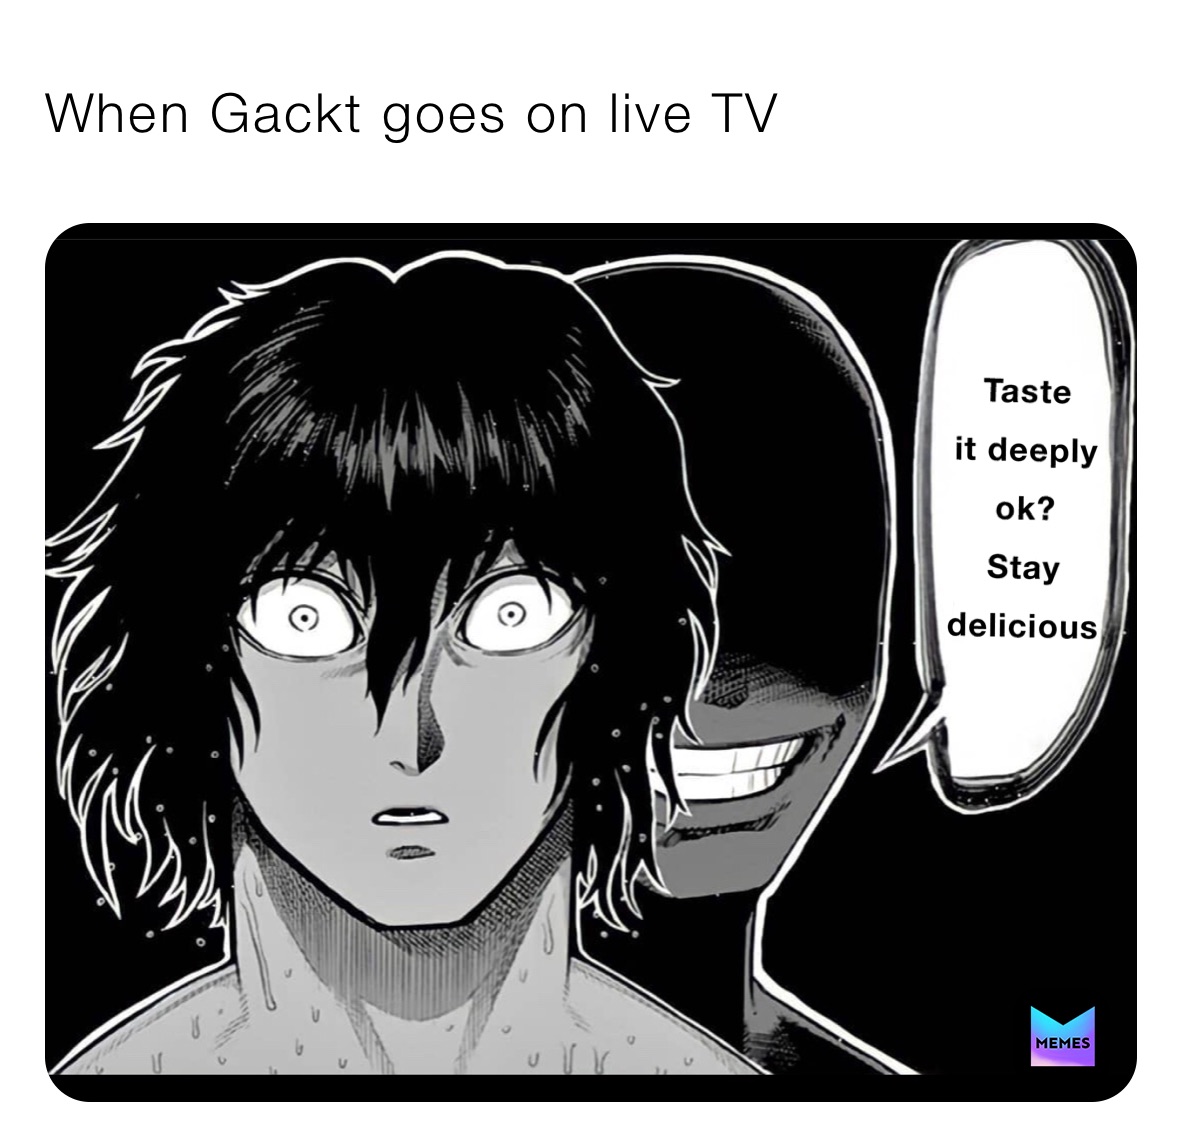 When Gackt goes on live TV